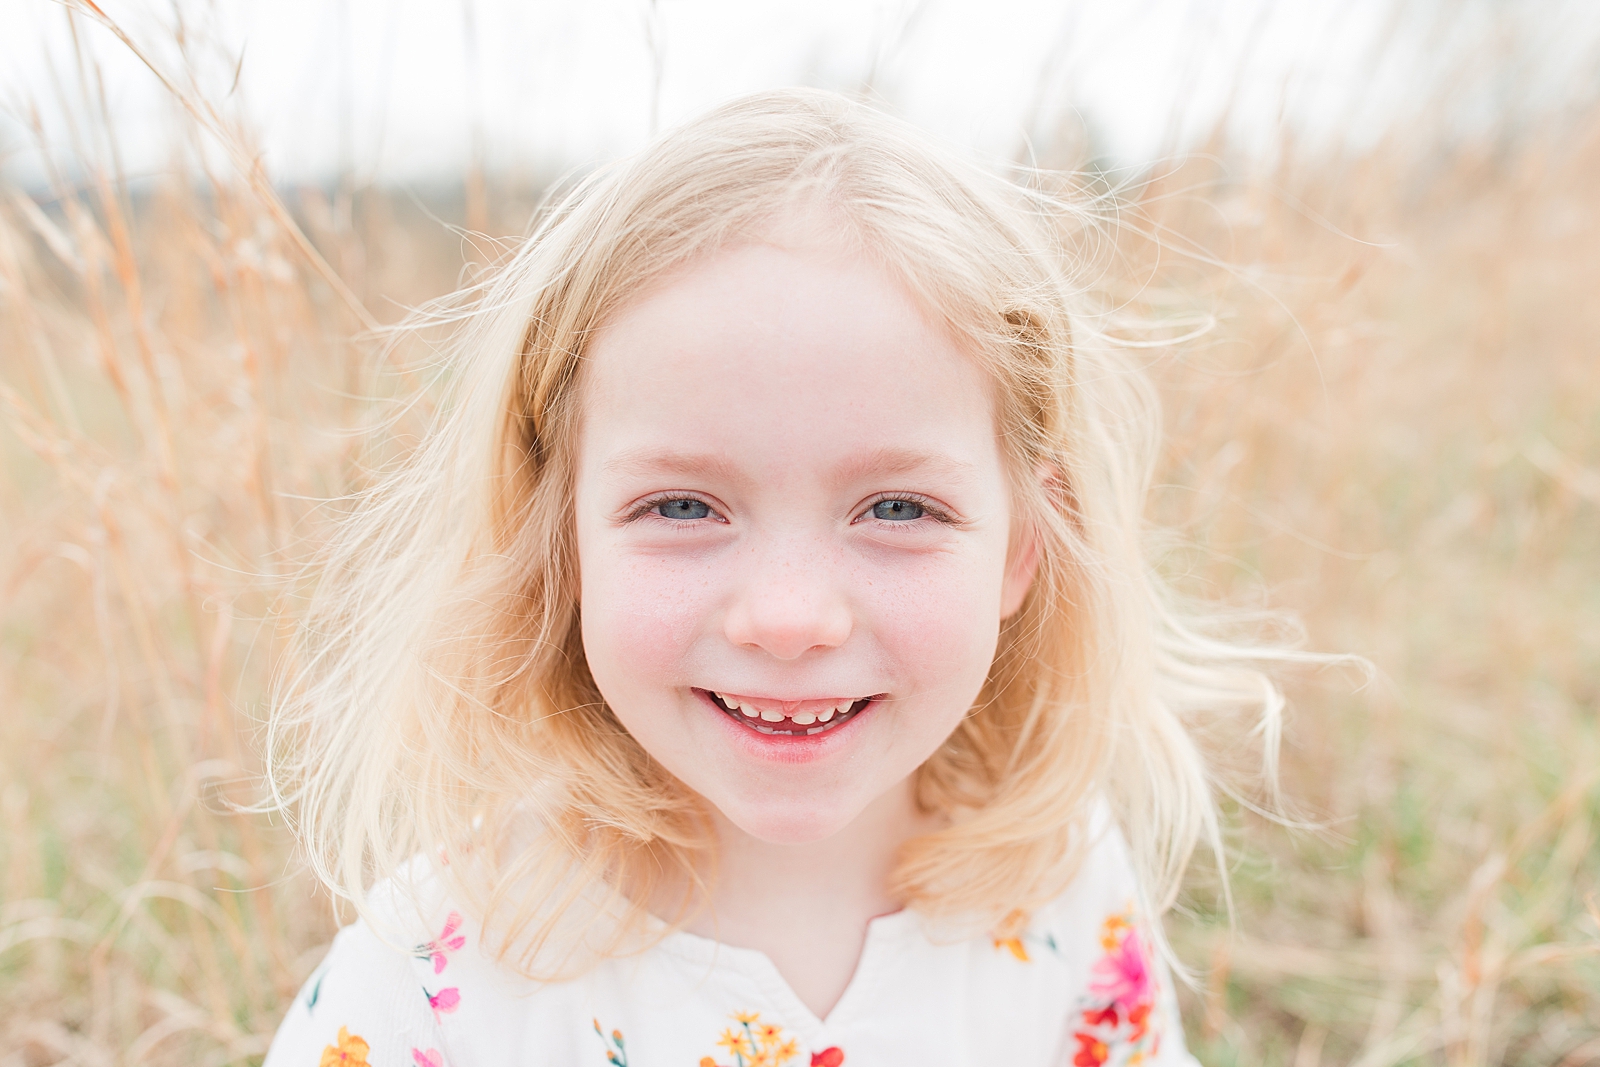 Asheville Photographer's Family blonde little girl with a big smile Photo